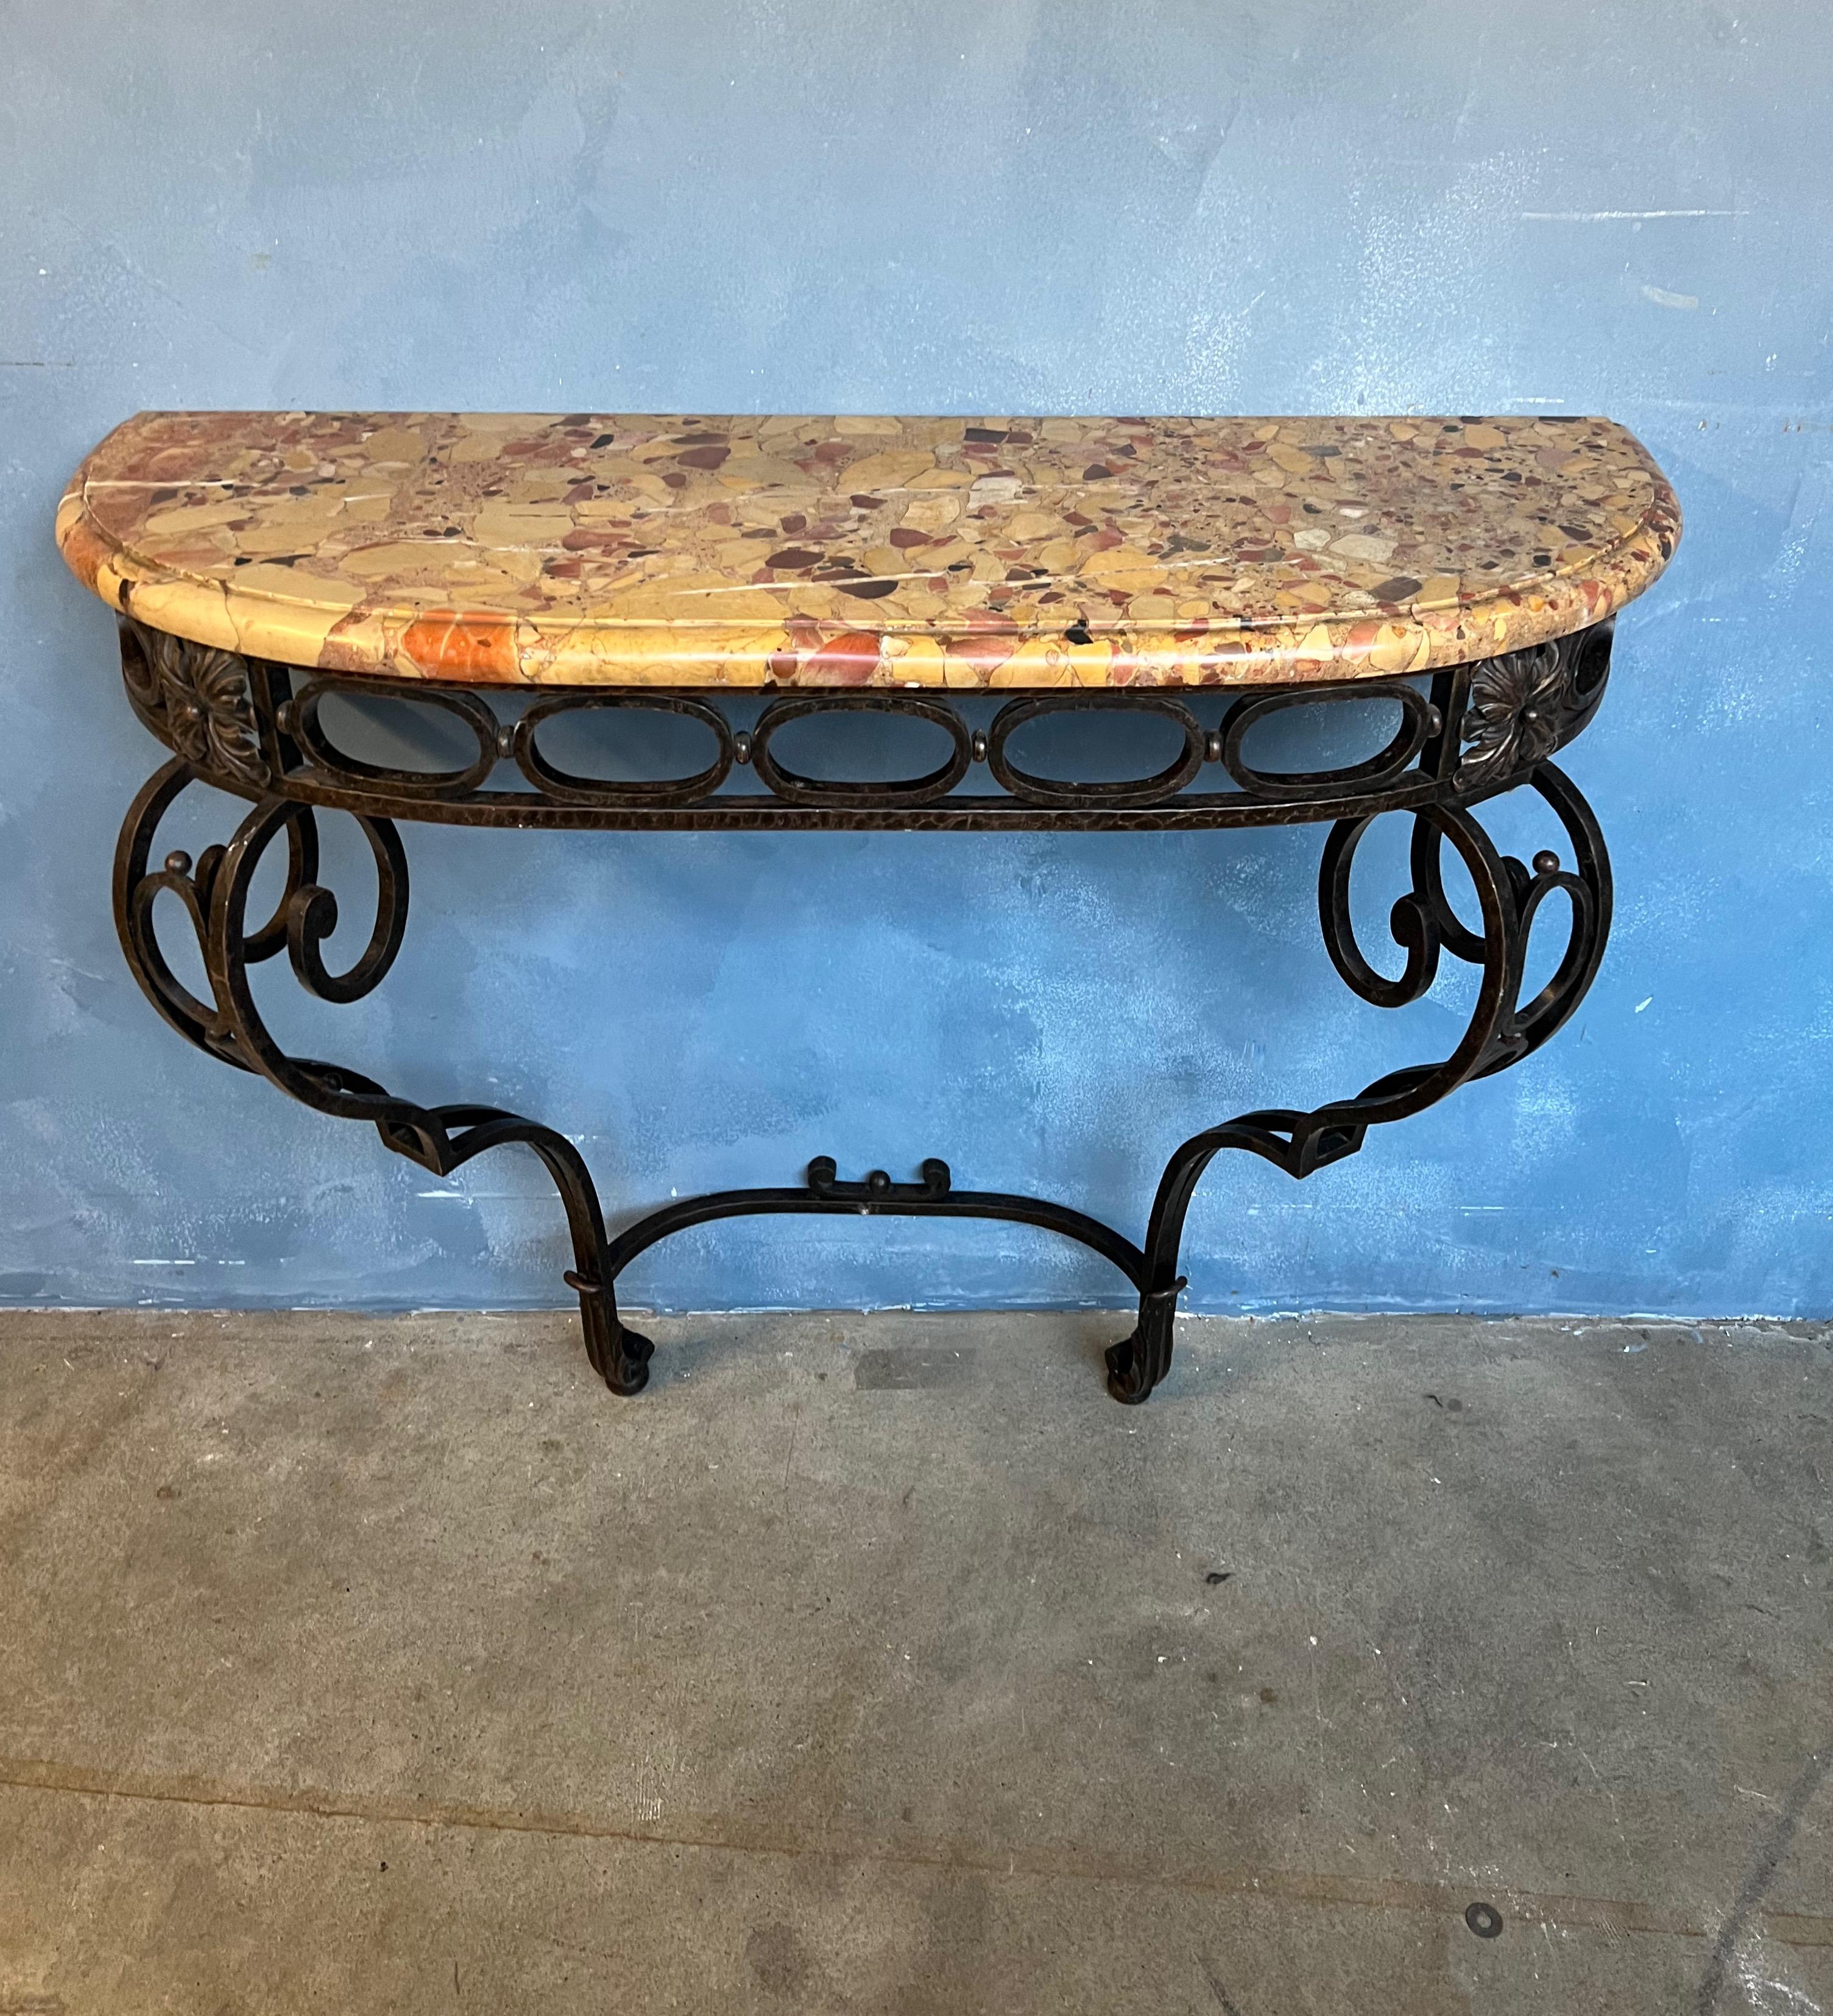 This beautiful and unique iron console with a marble top dating back to the 1920s has a stunningly intricate wrought iron base that is composed of delicate scroll and foliage patterns, a classic French motif. The dark patina is original,